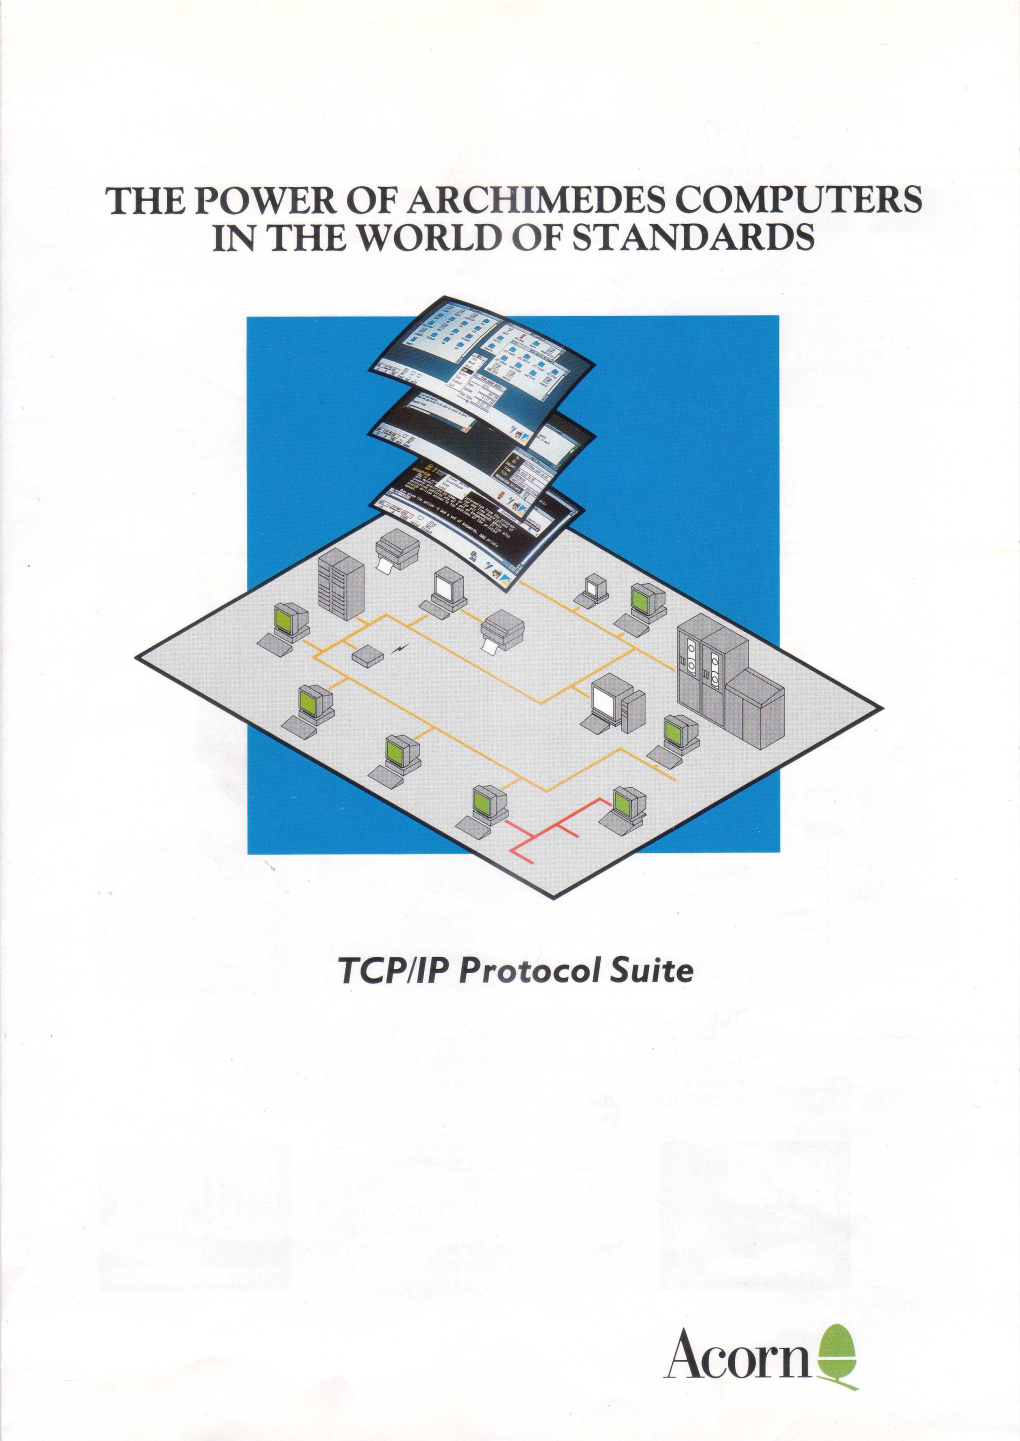 TCP/IP Protocol Suite INTEGRATING RISC OS TECHNOLOGY INTO MIXED NETWORKS